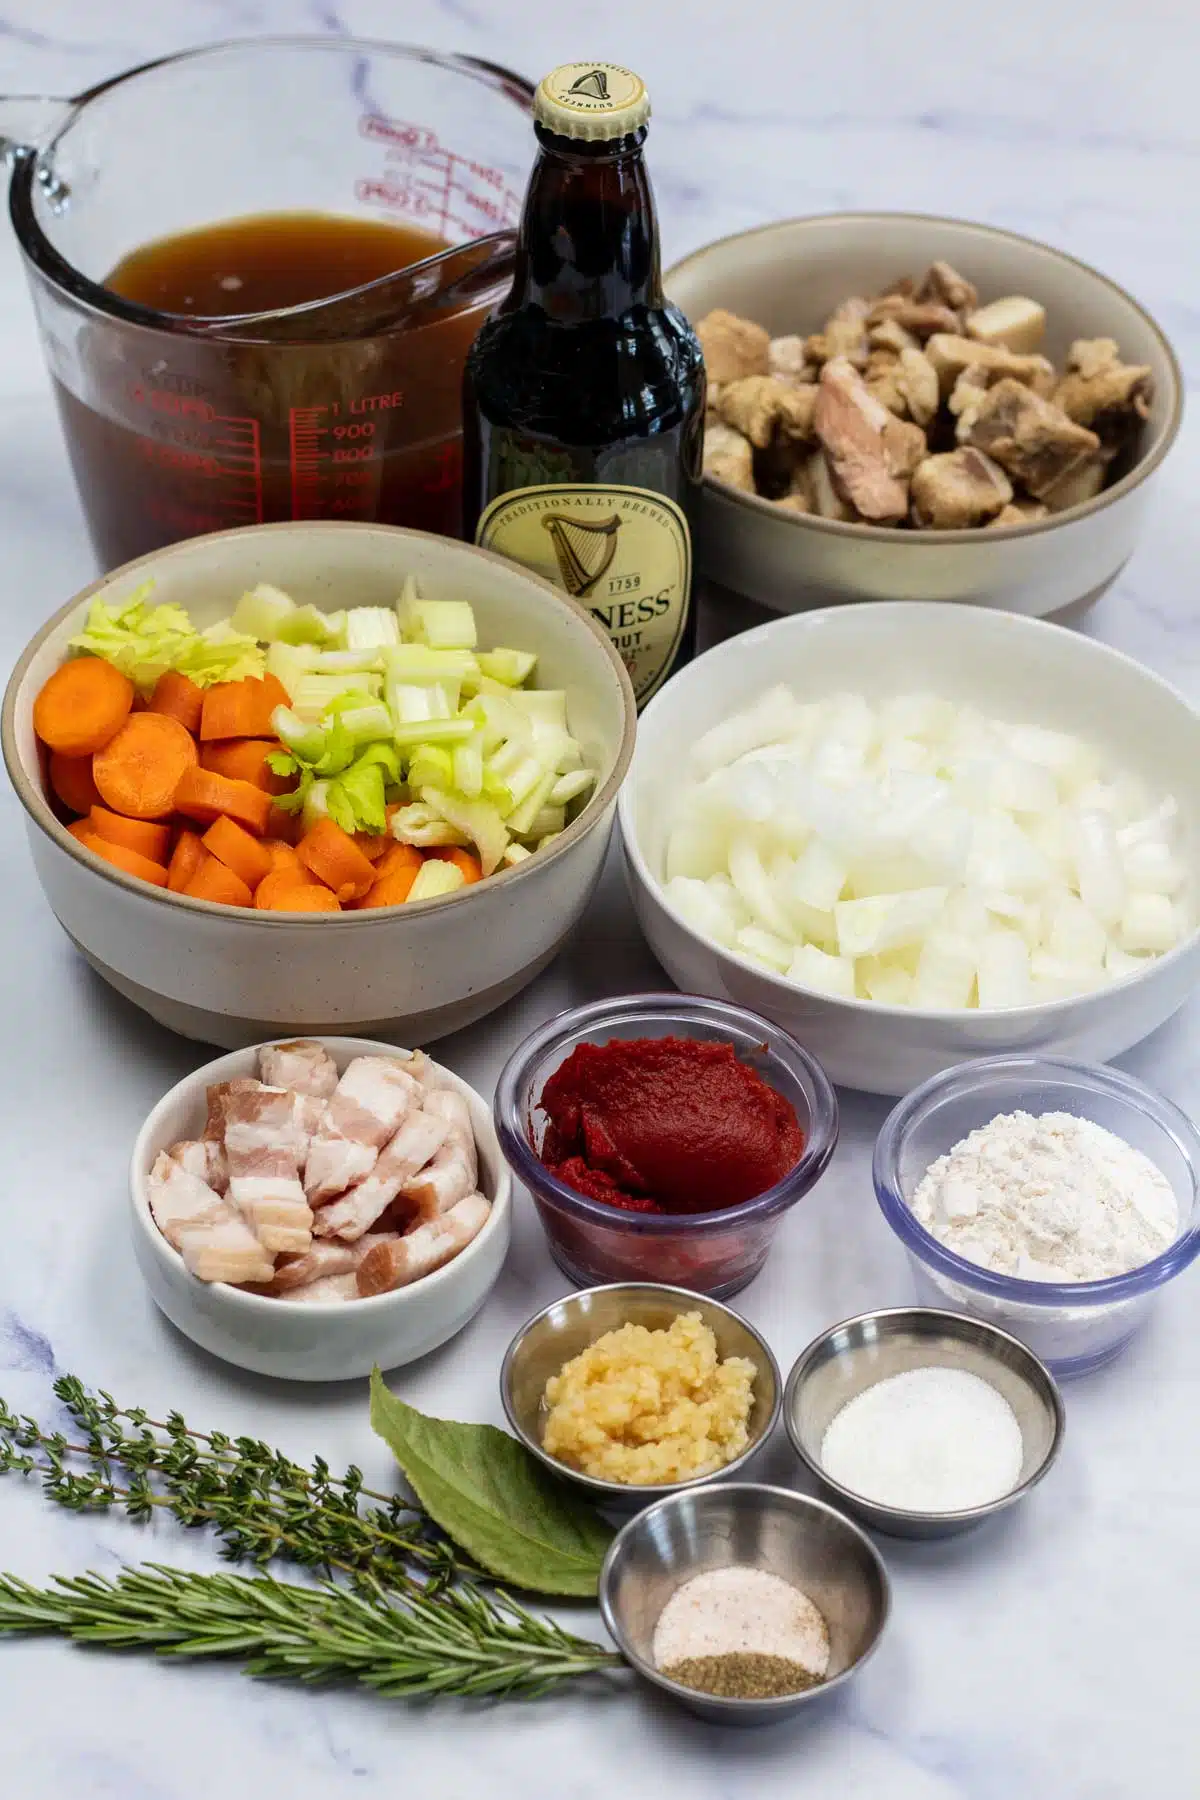 Tall image of Guinness lamb stew ingredients.